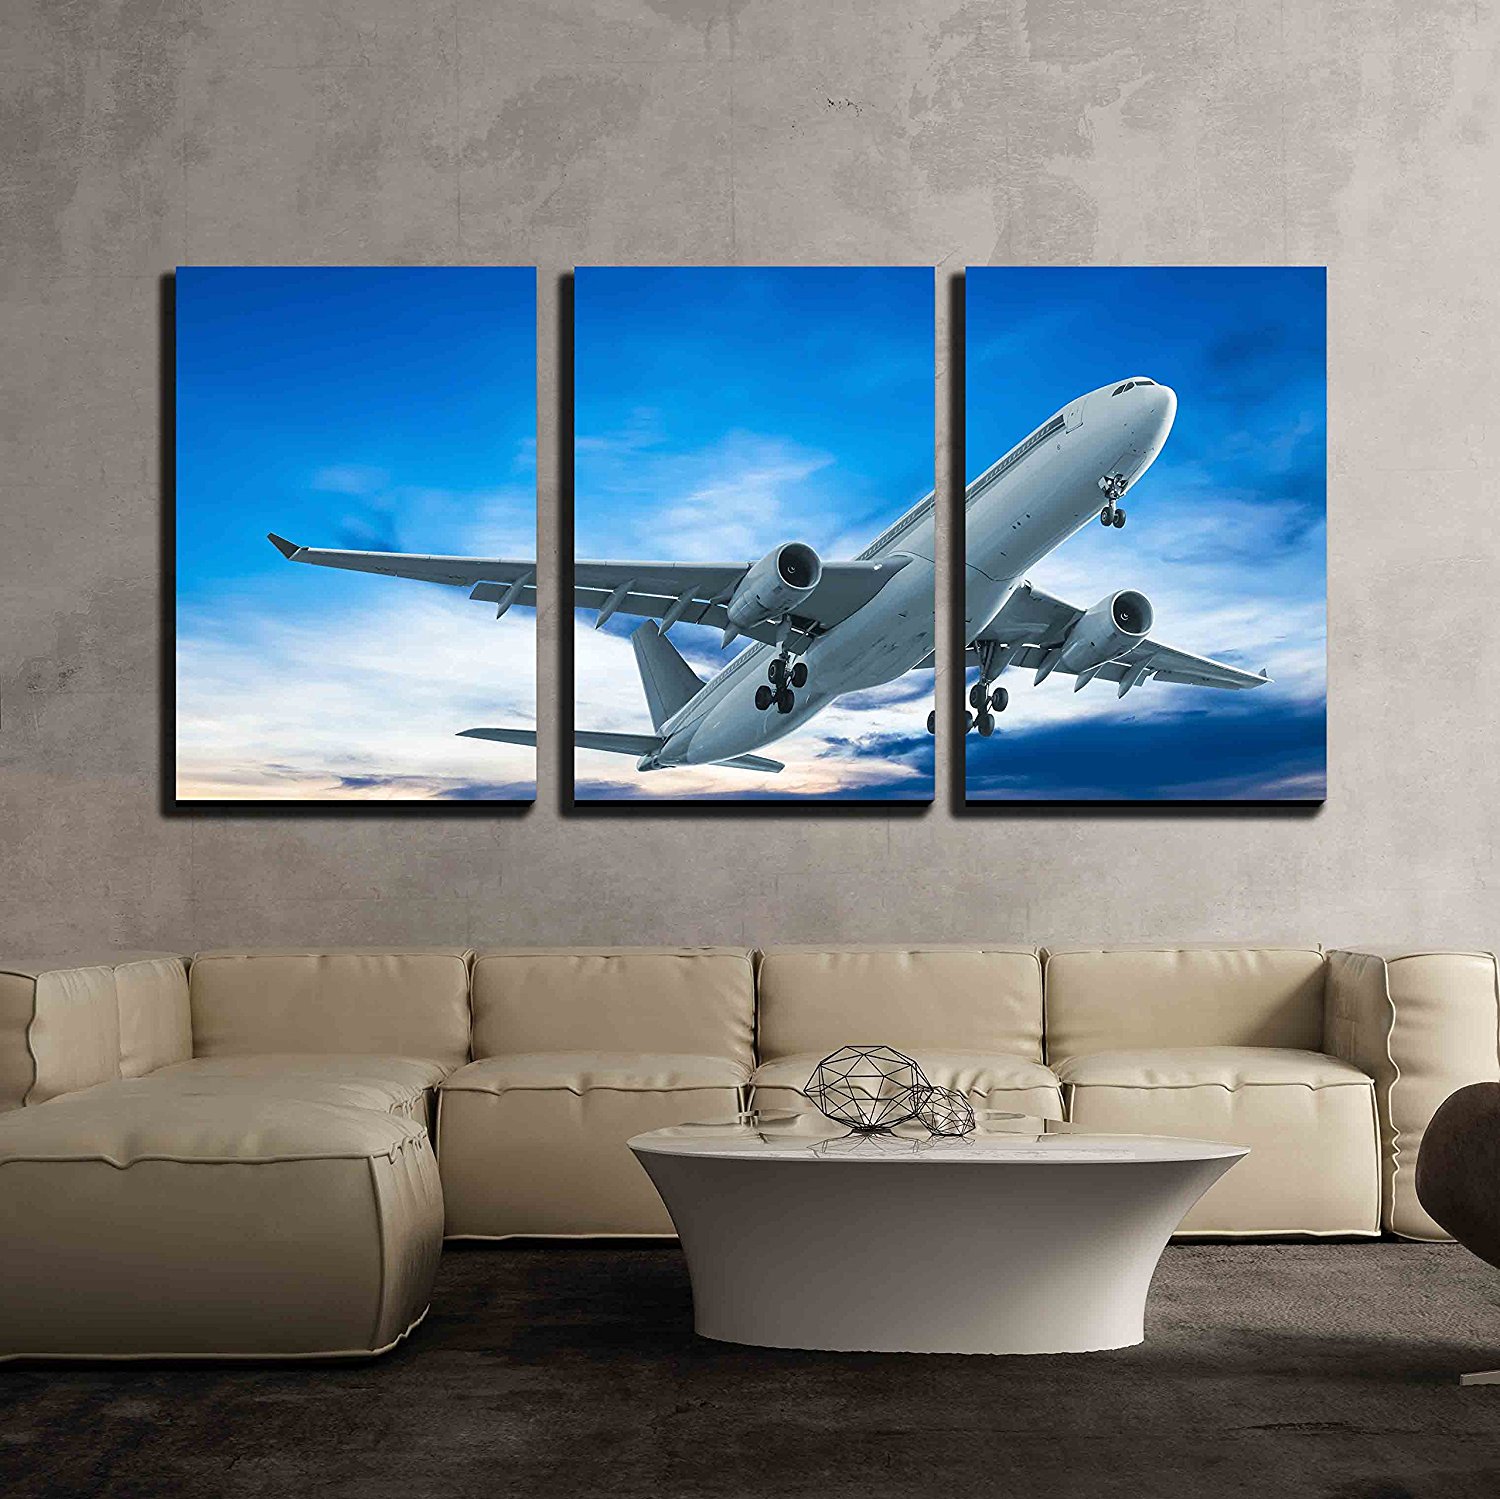 Commercial Airplane Flying at Sunset Canvas Wall Art Modern Home Decor Drop shipping 